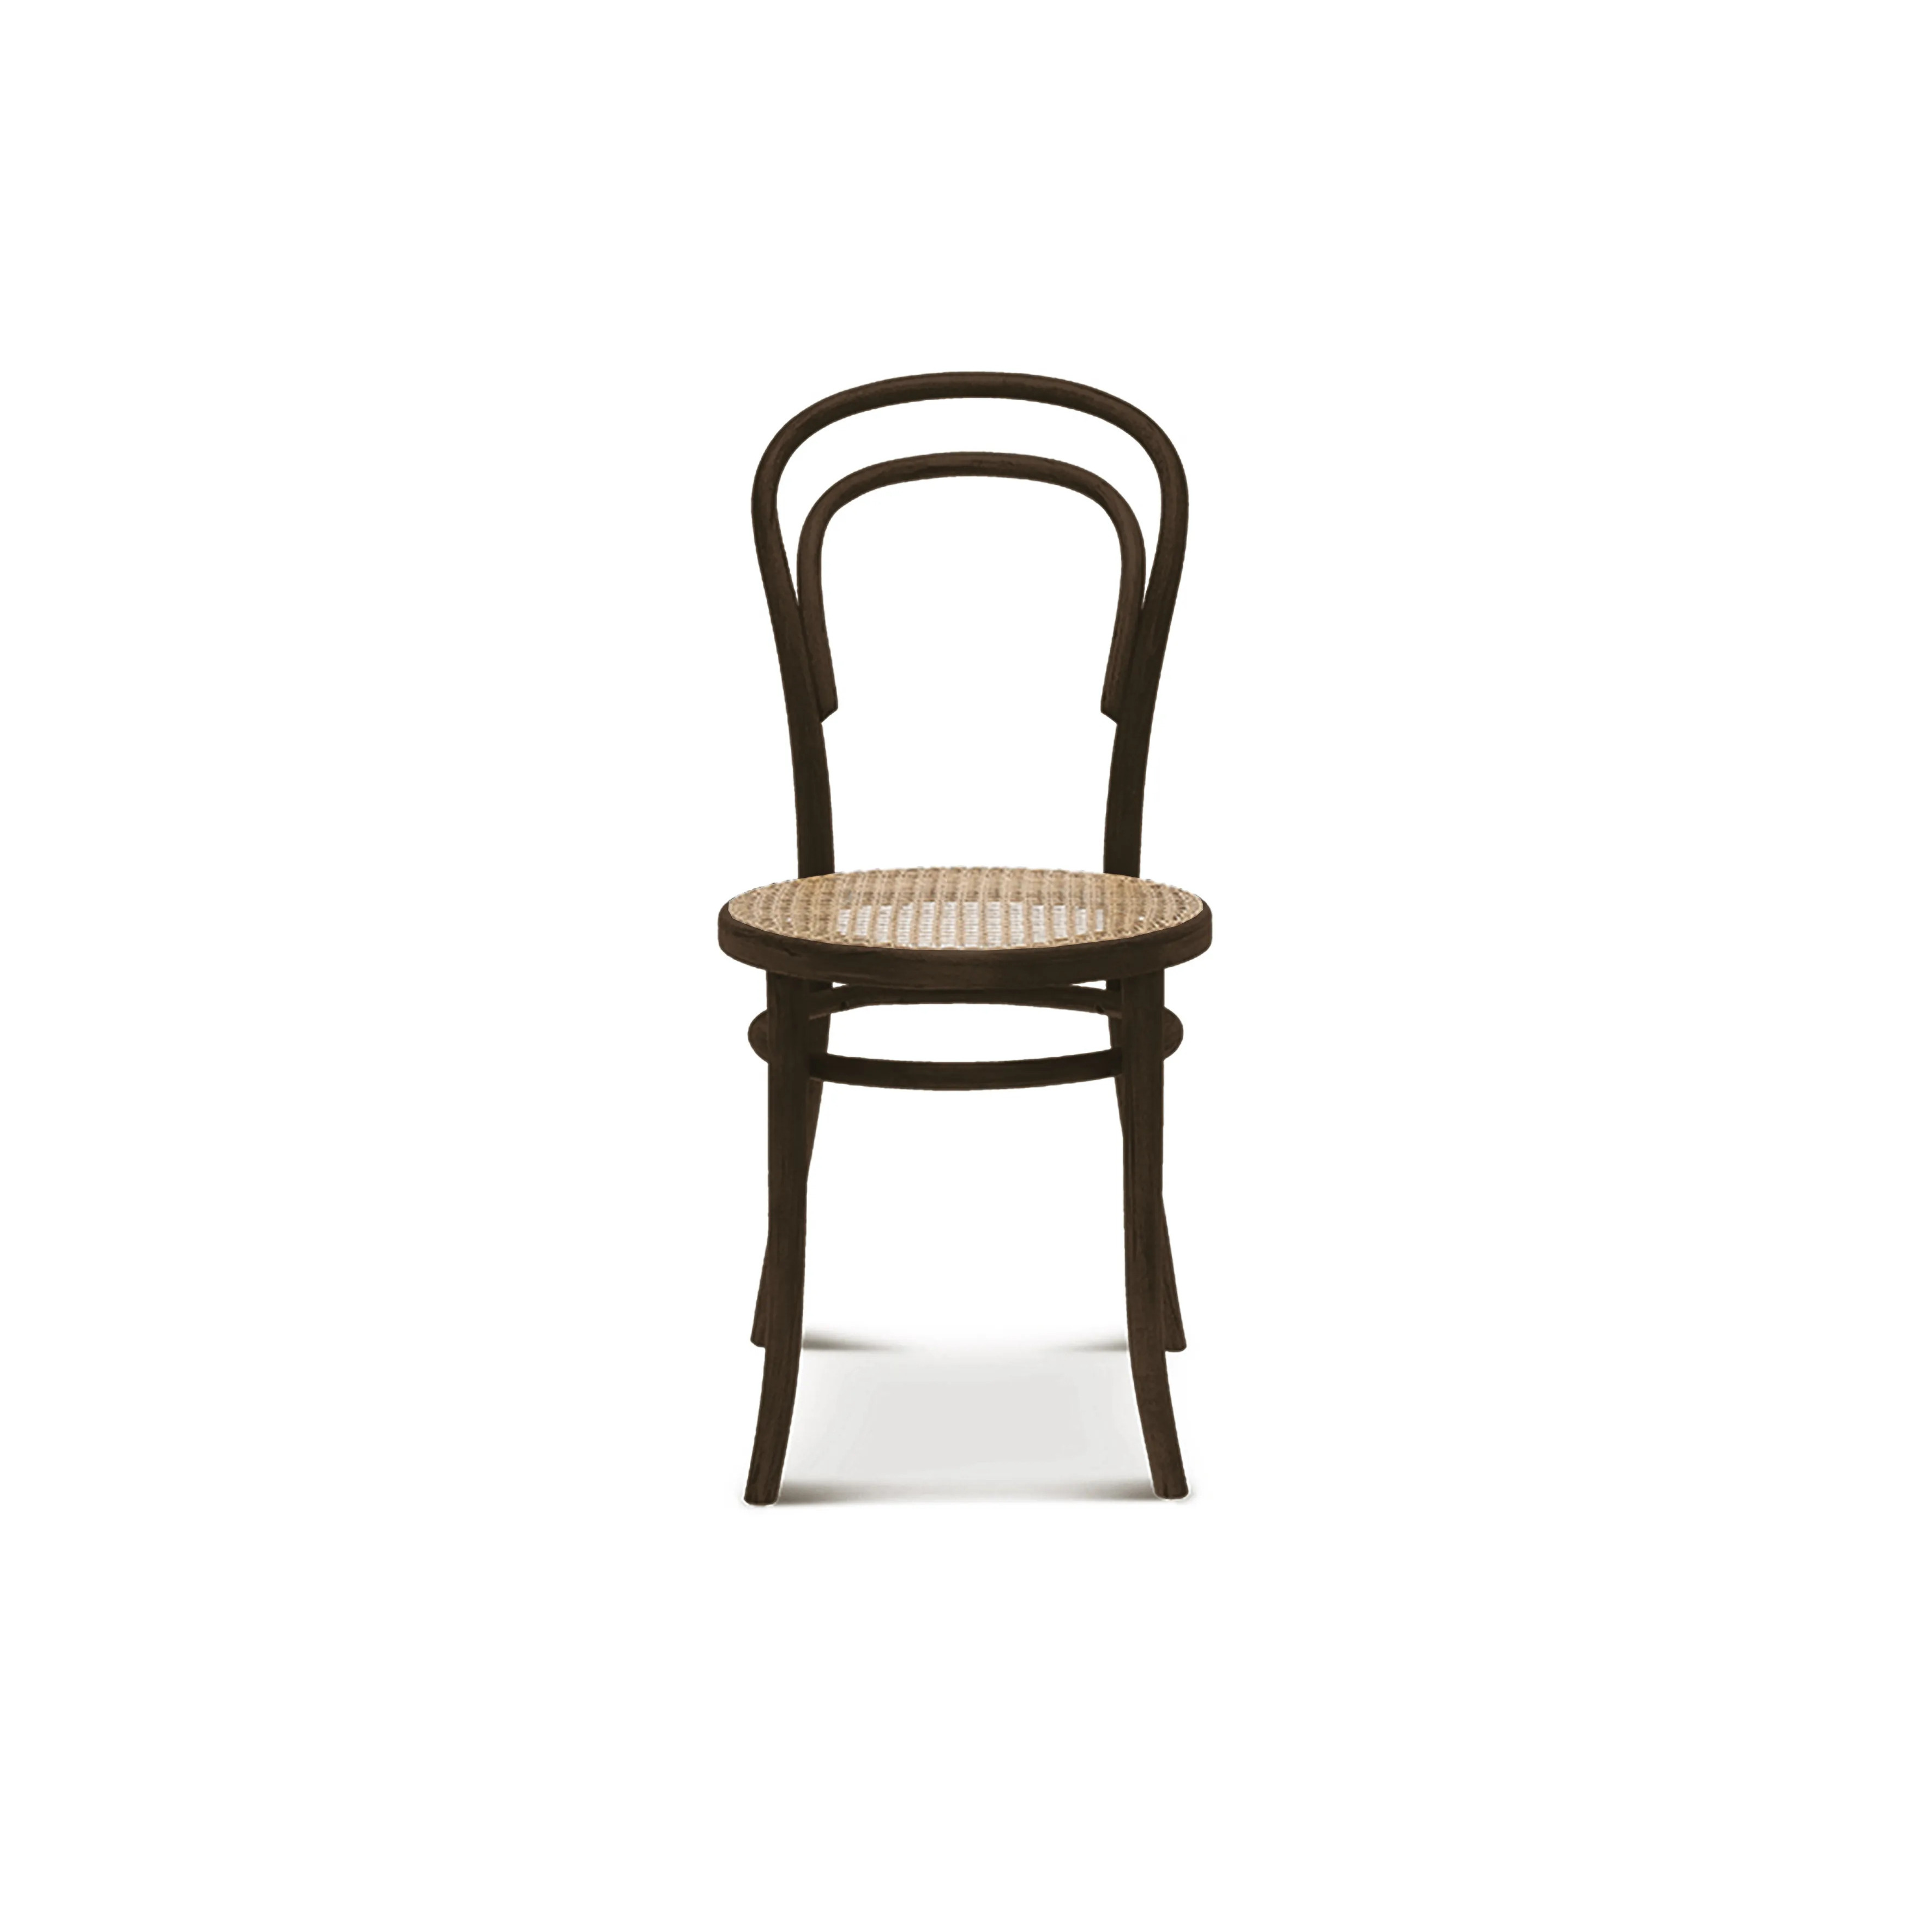 Wallace Cane Seat Dining Chair, Walnut